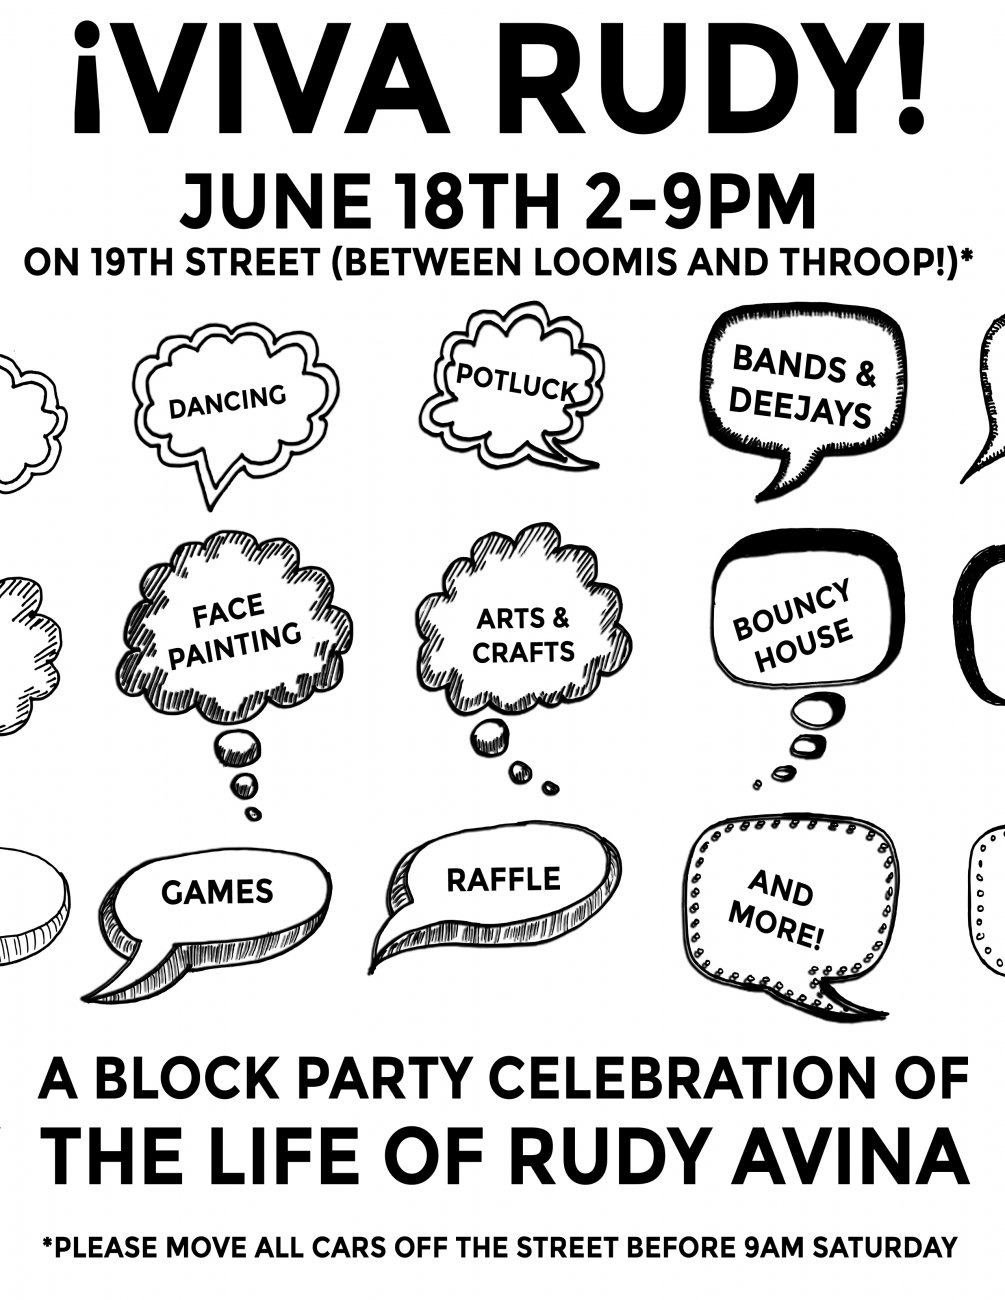 Black and white illustrated flyer for the block party